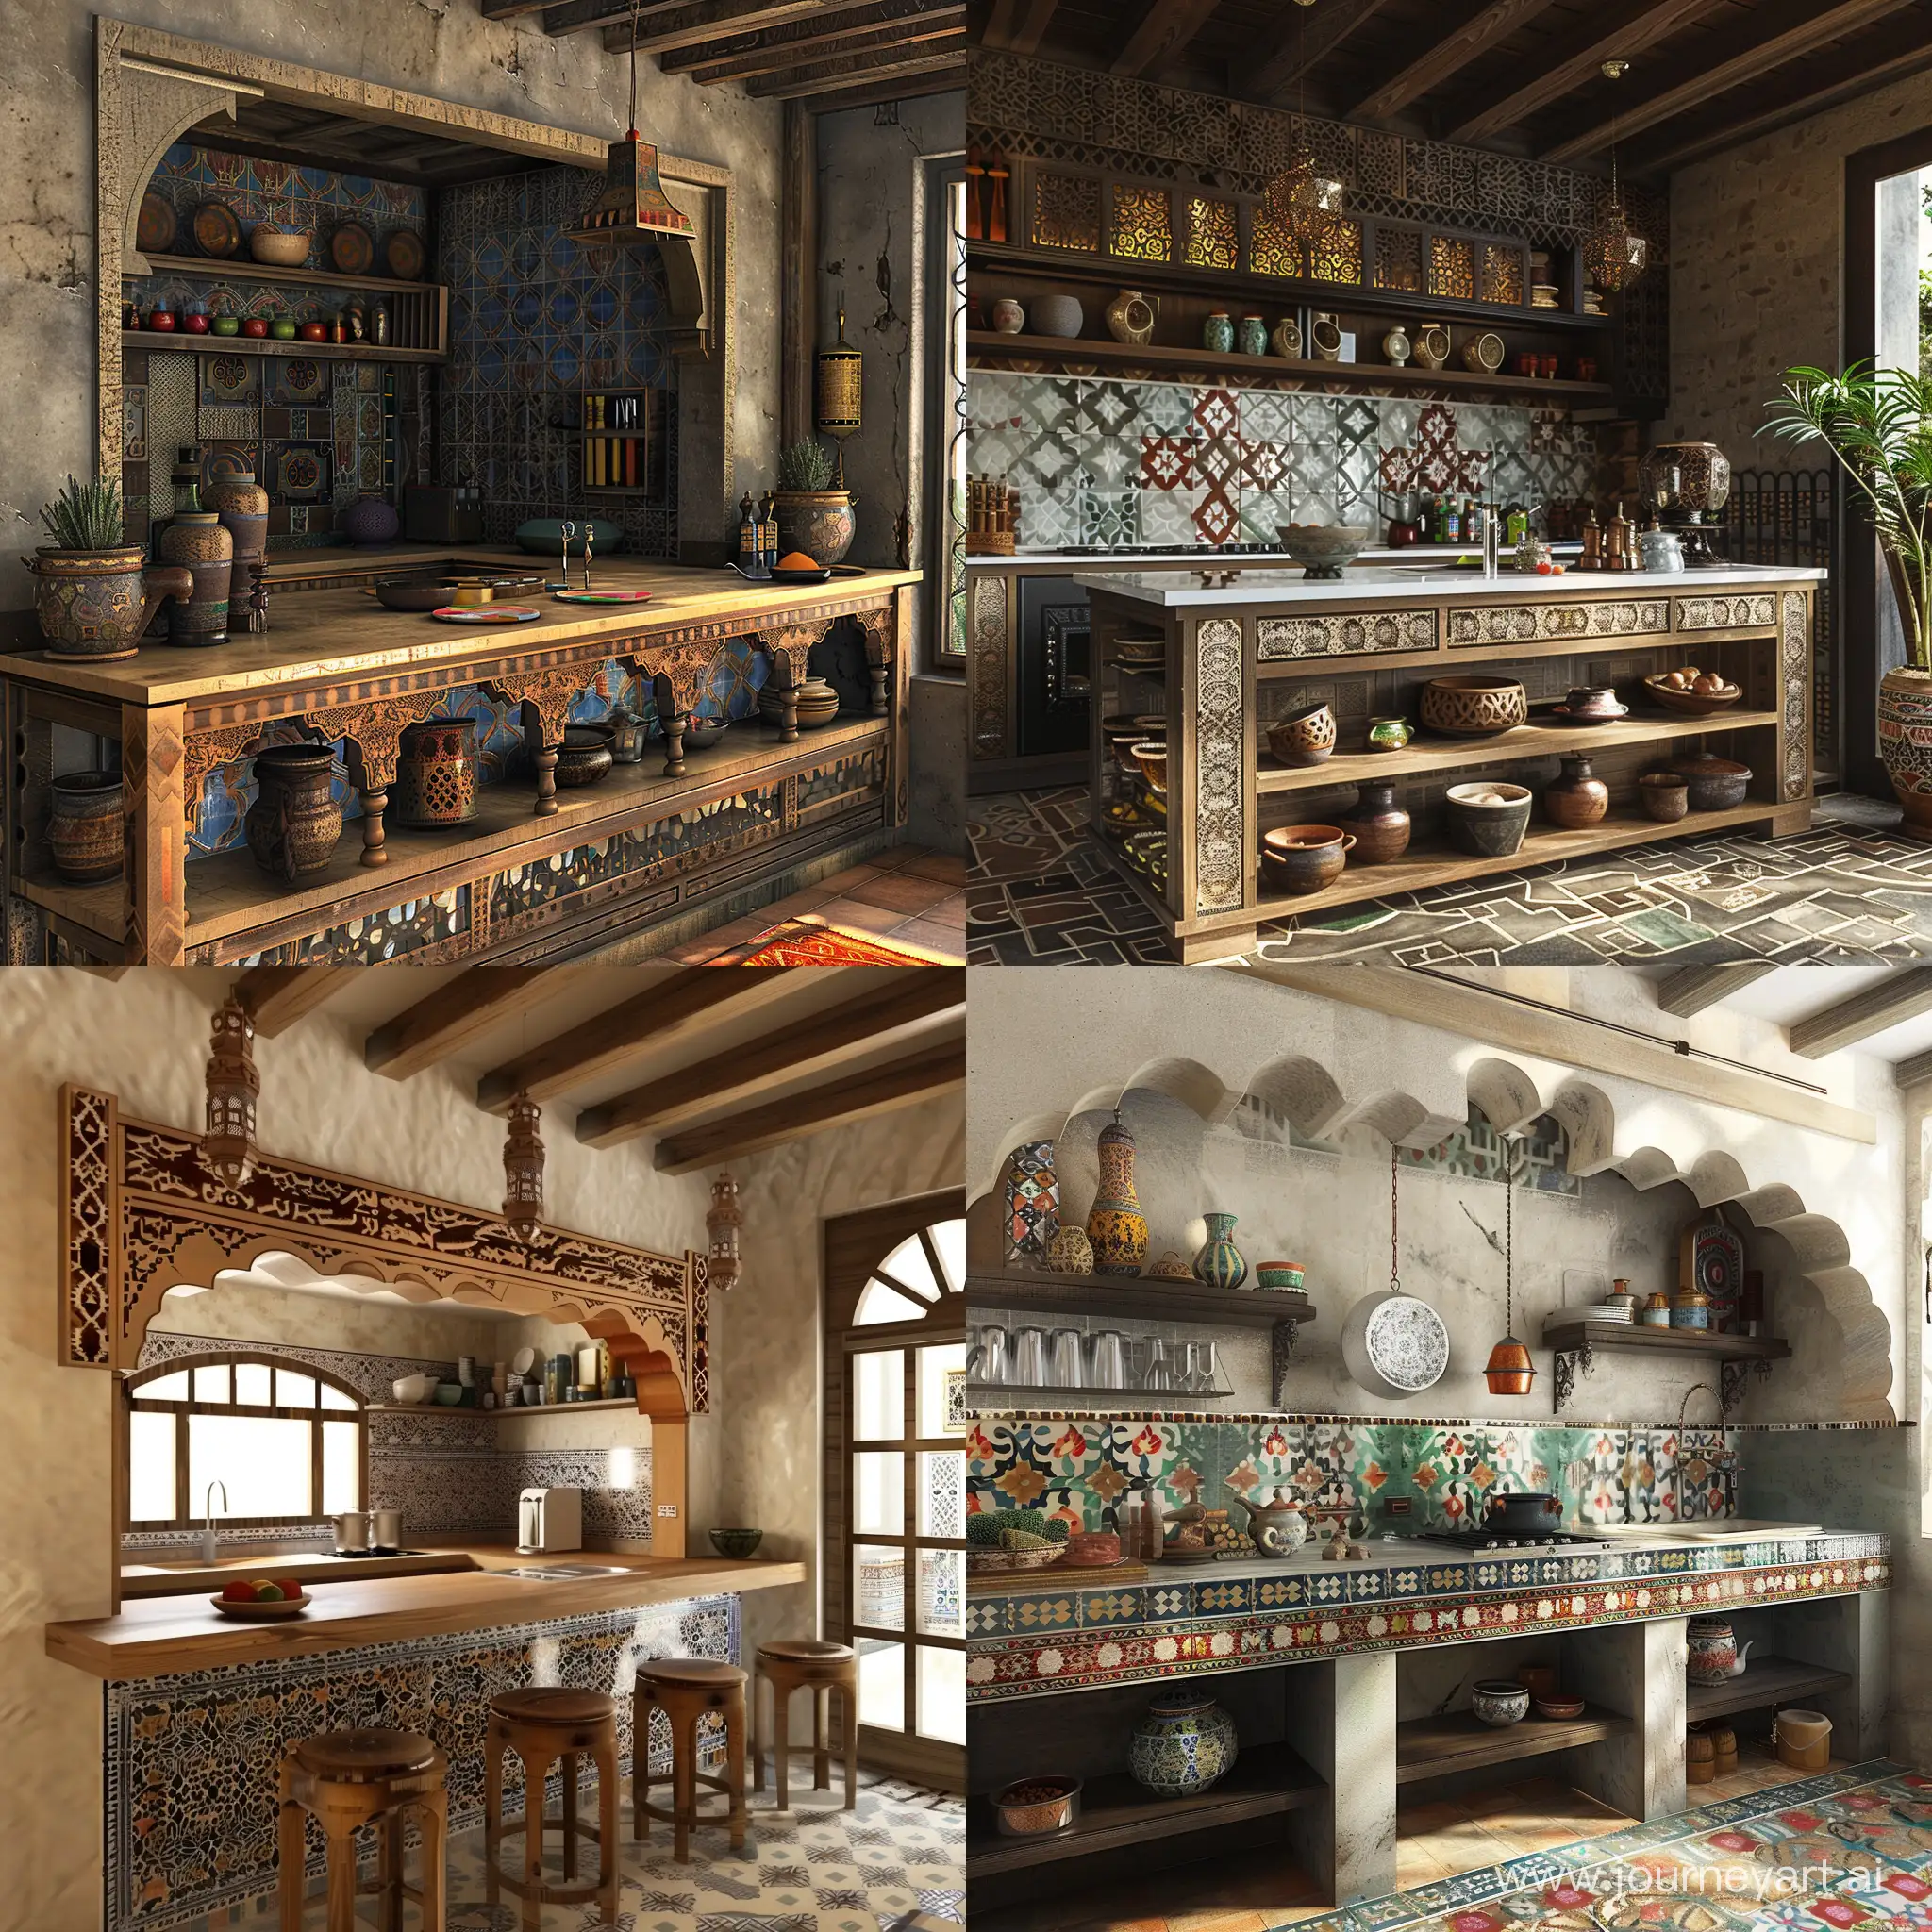 Counter design for a traditional Yemeni kitchen,with the Yemeni character